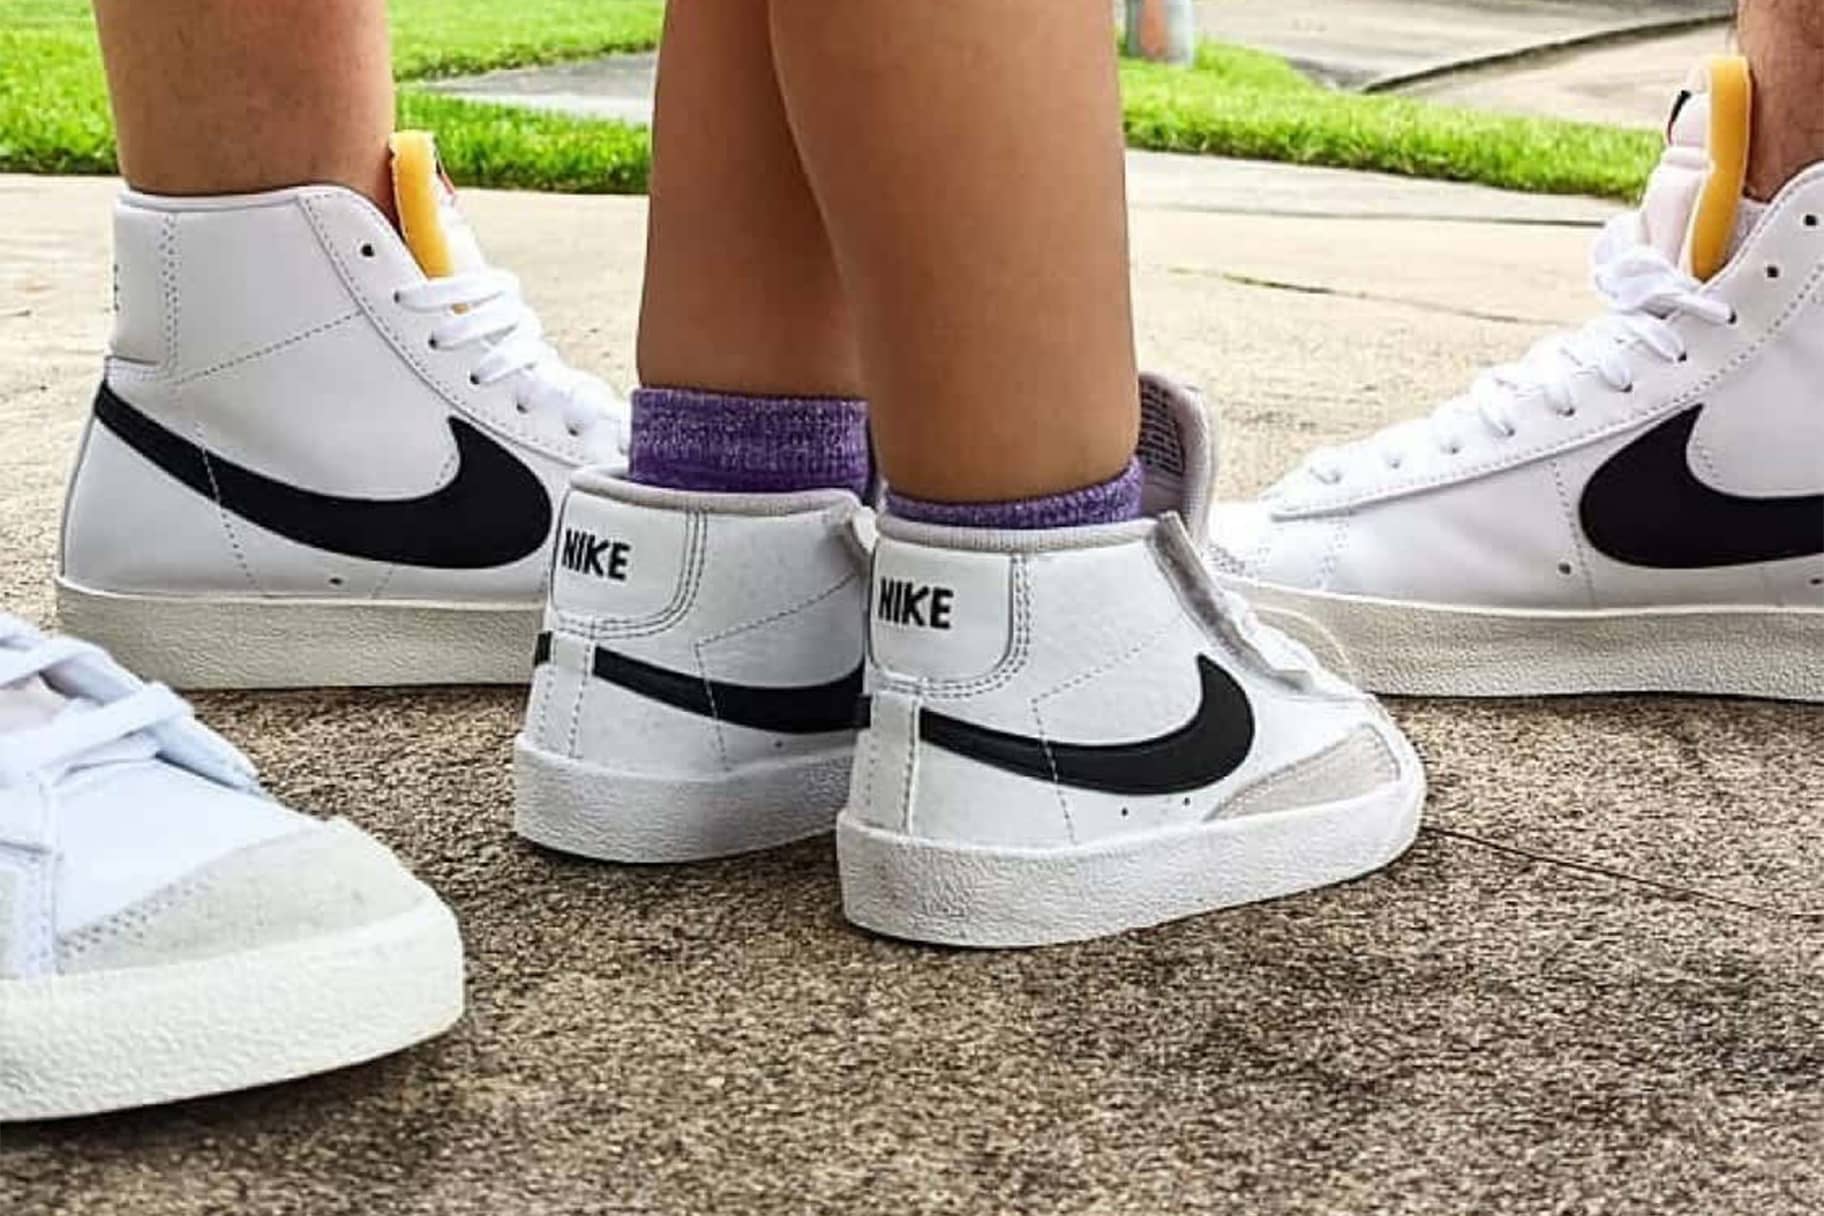 Shop Matching Nike Outfits for the Whole Family